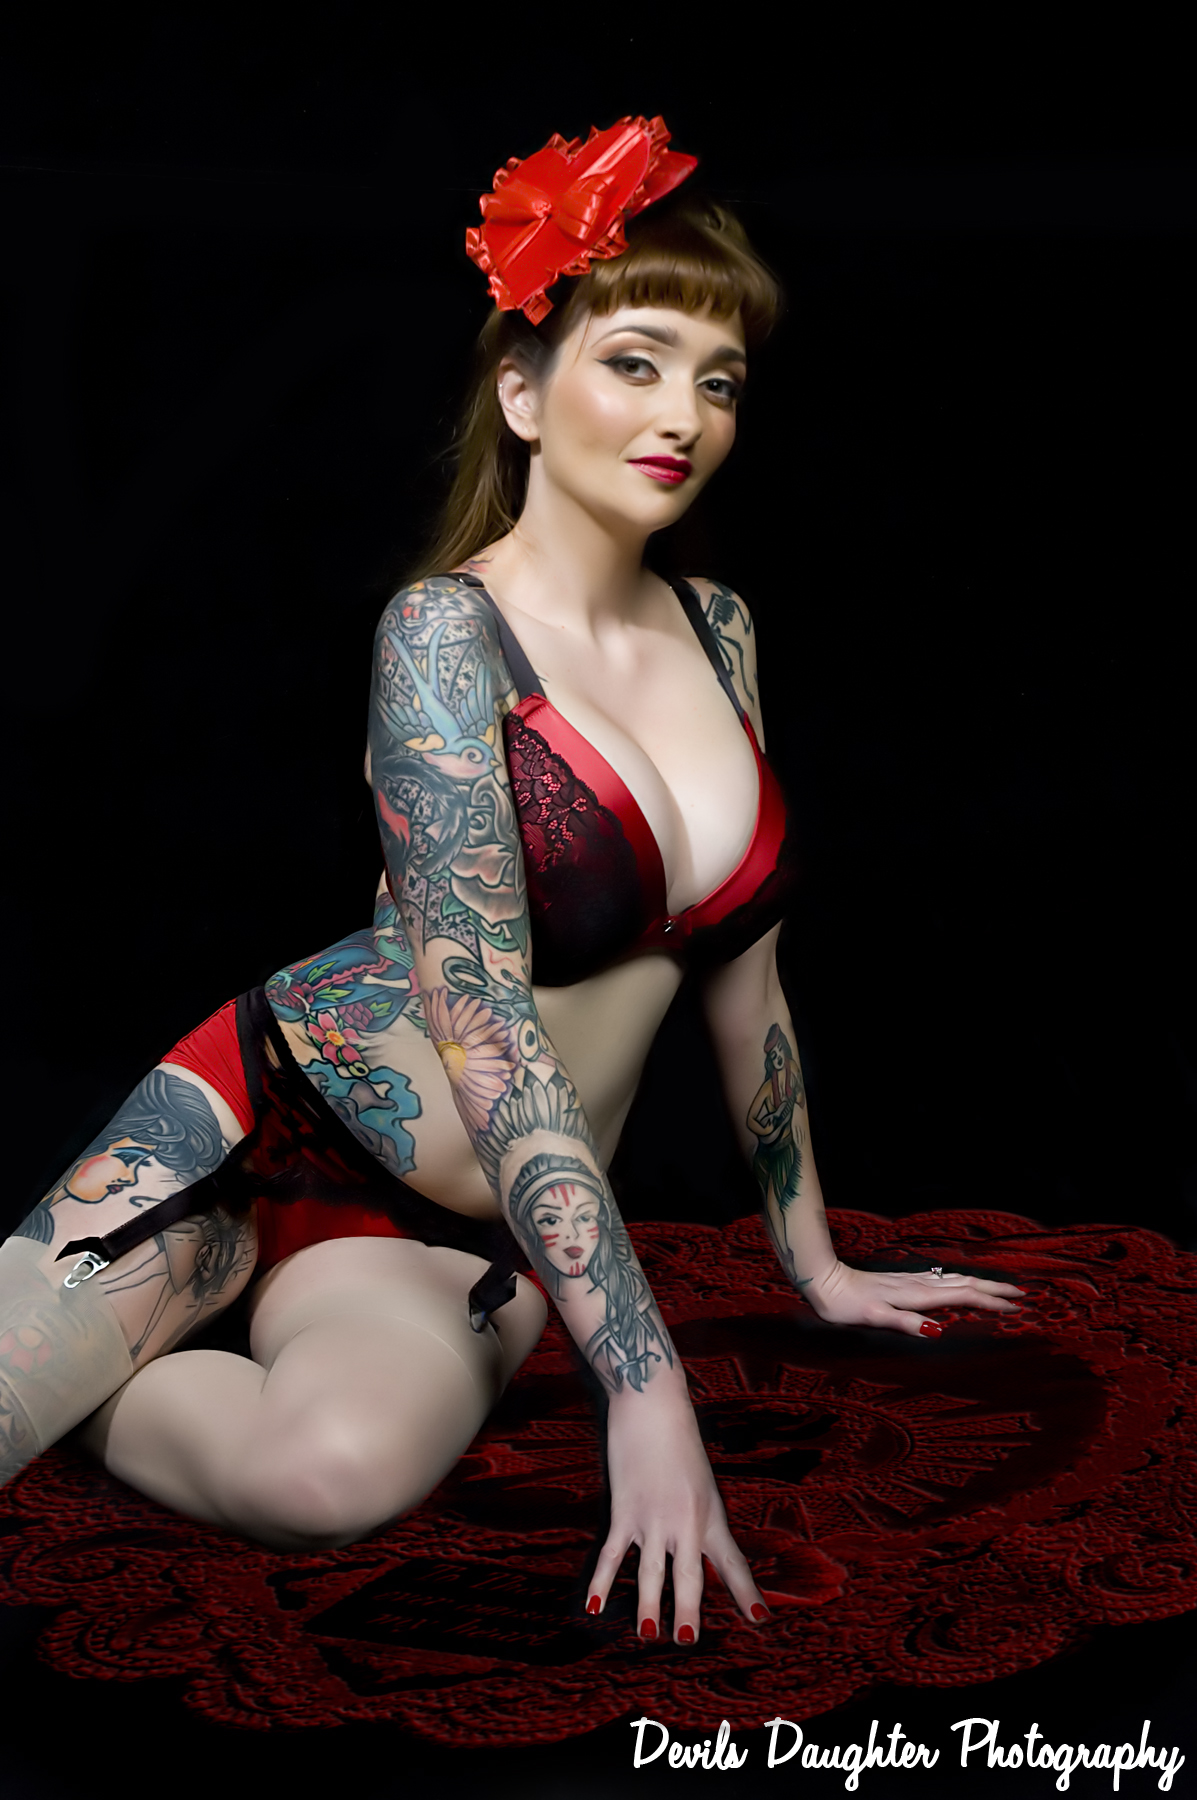 http://www.atomicpinup.com/images/MissTawnieTrouble_2.JPG